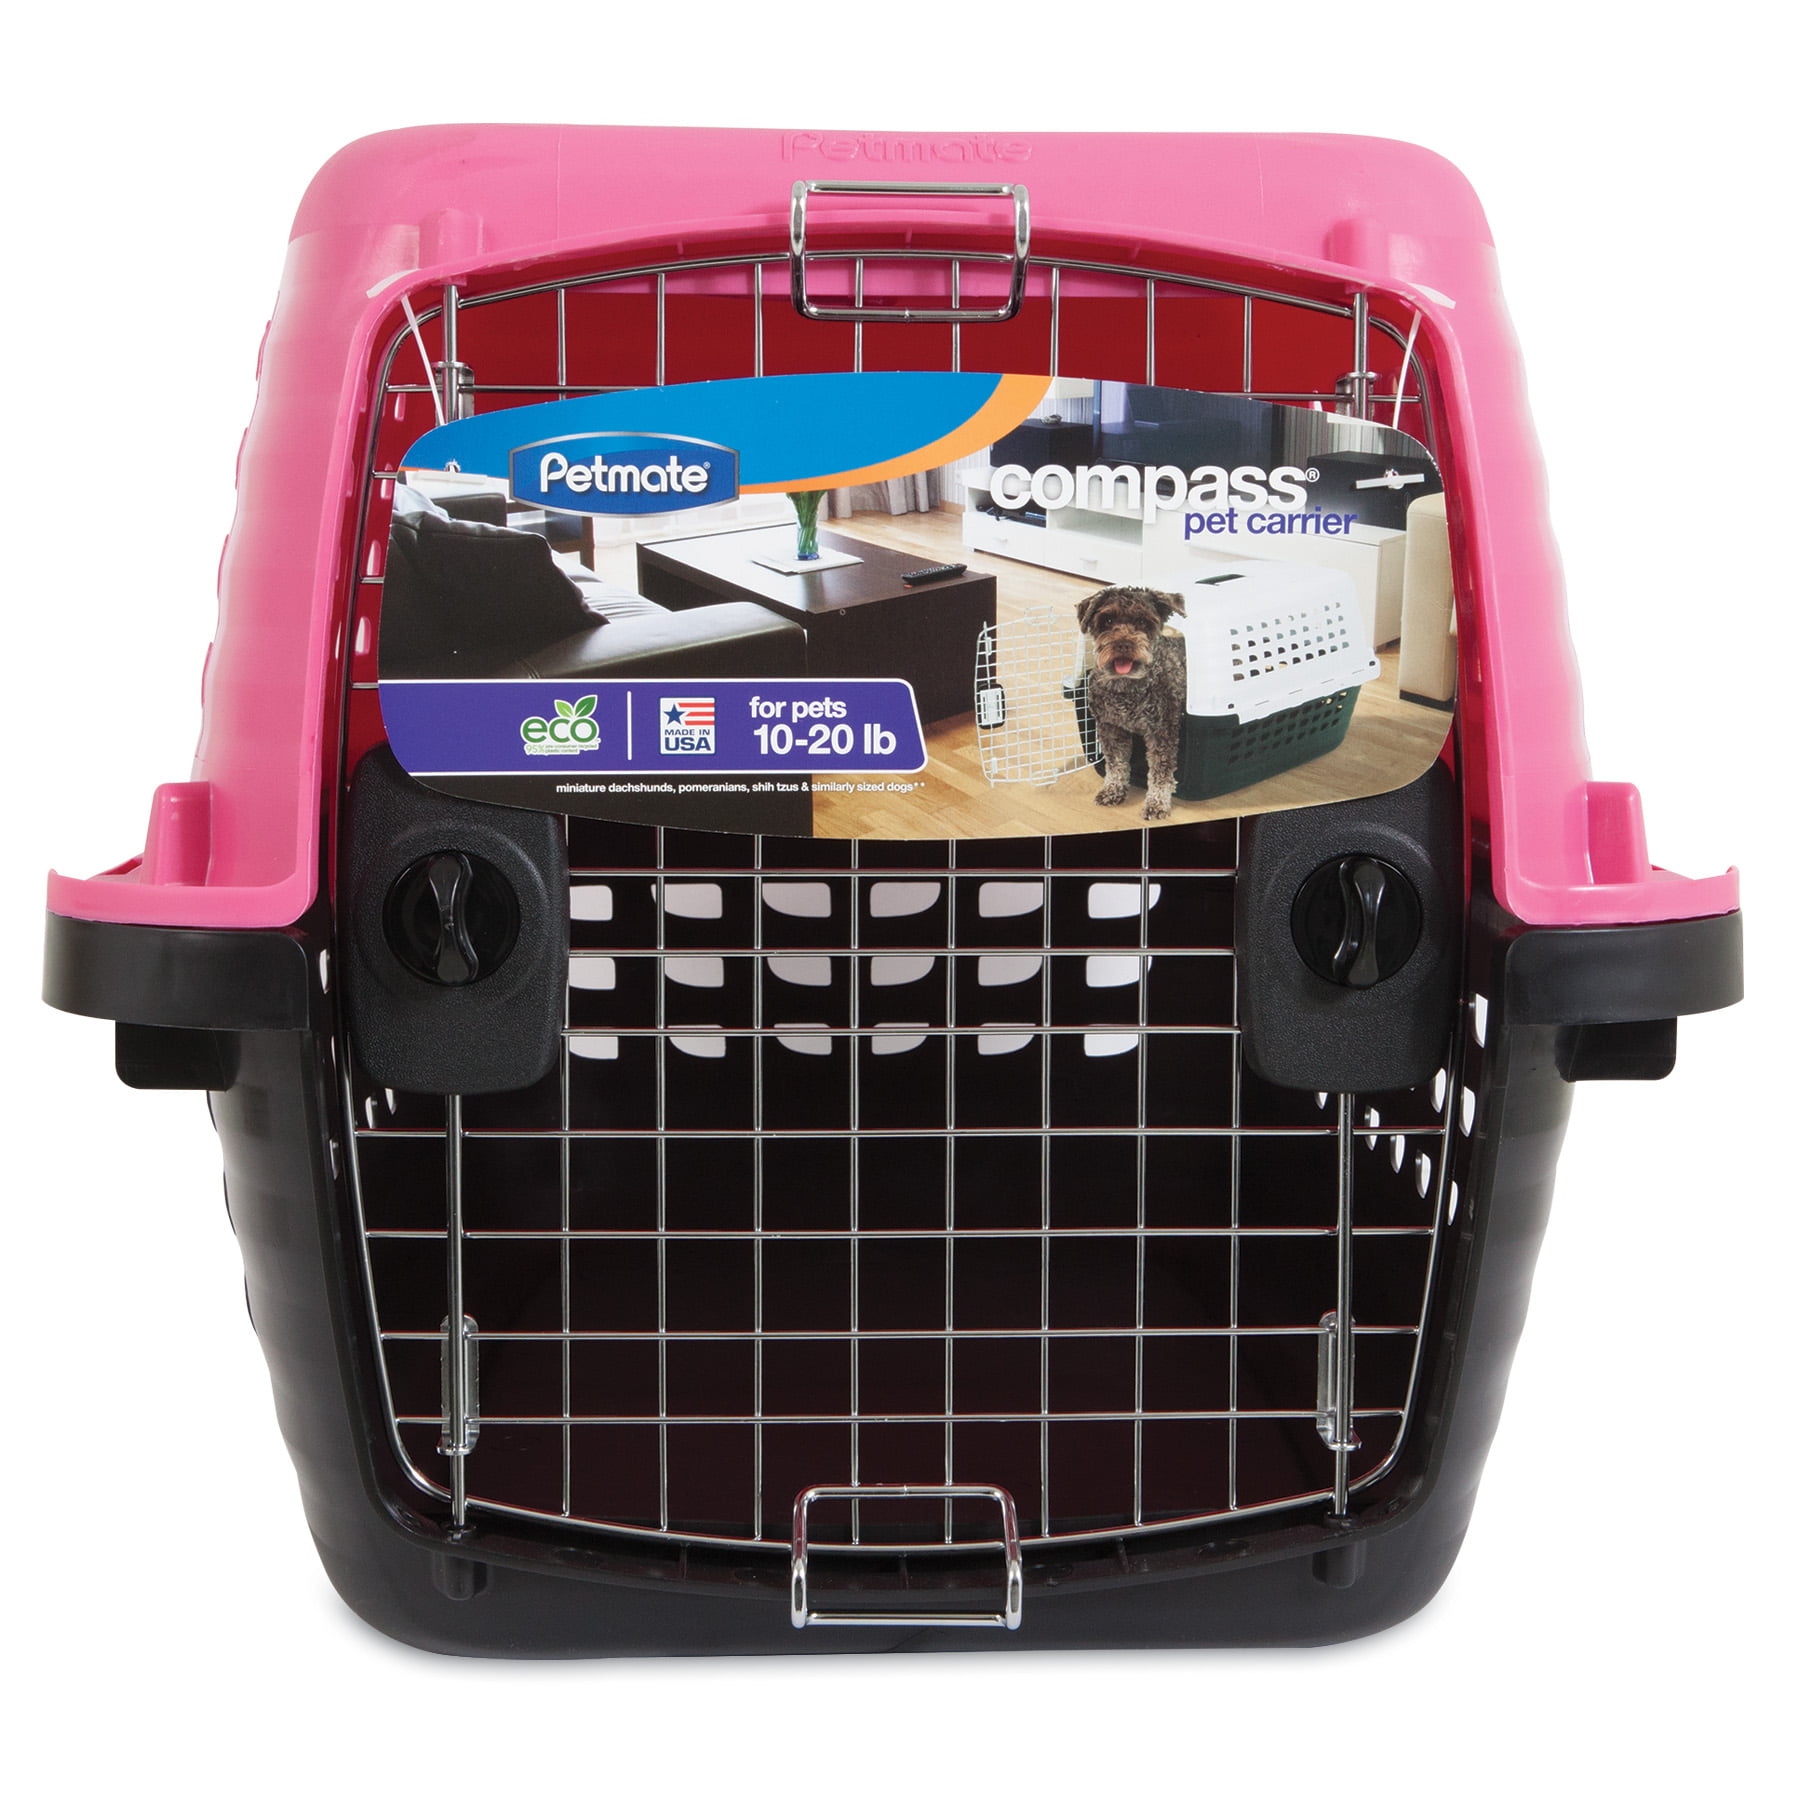 Petmate Compass Fashion Dog and Cat Kennel, Hot Pink, Small, 24